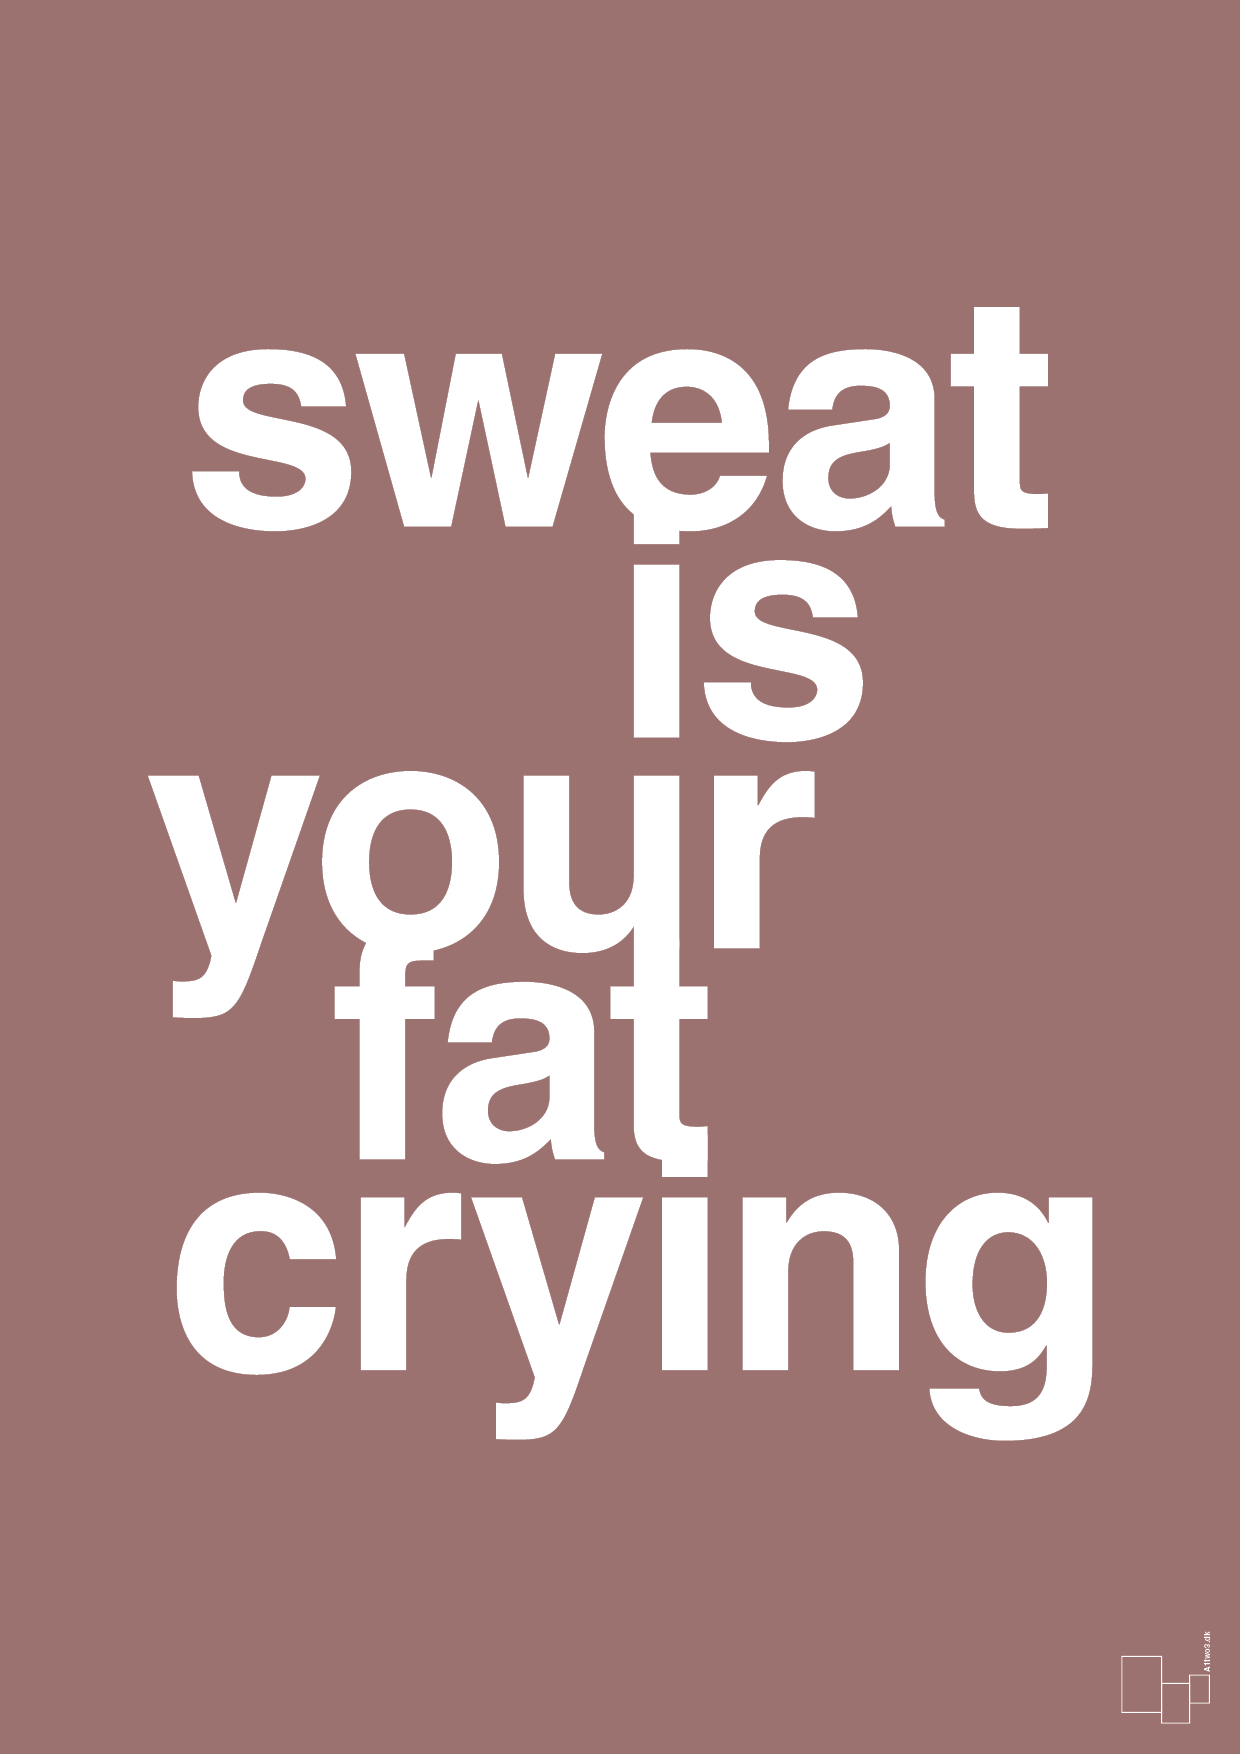 sweat is your fat crying - Plakat med Sport & Fritid i Plum